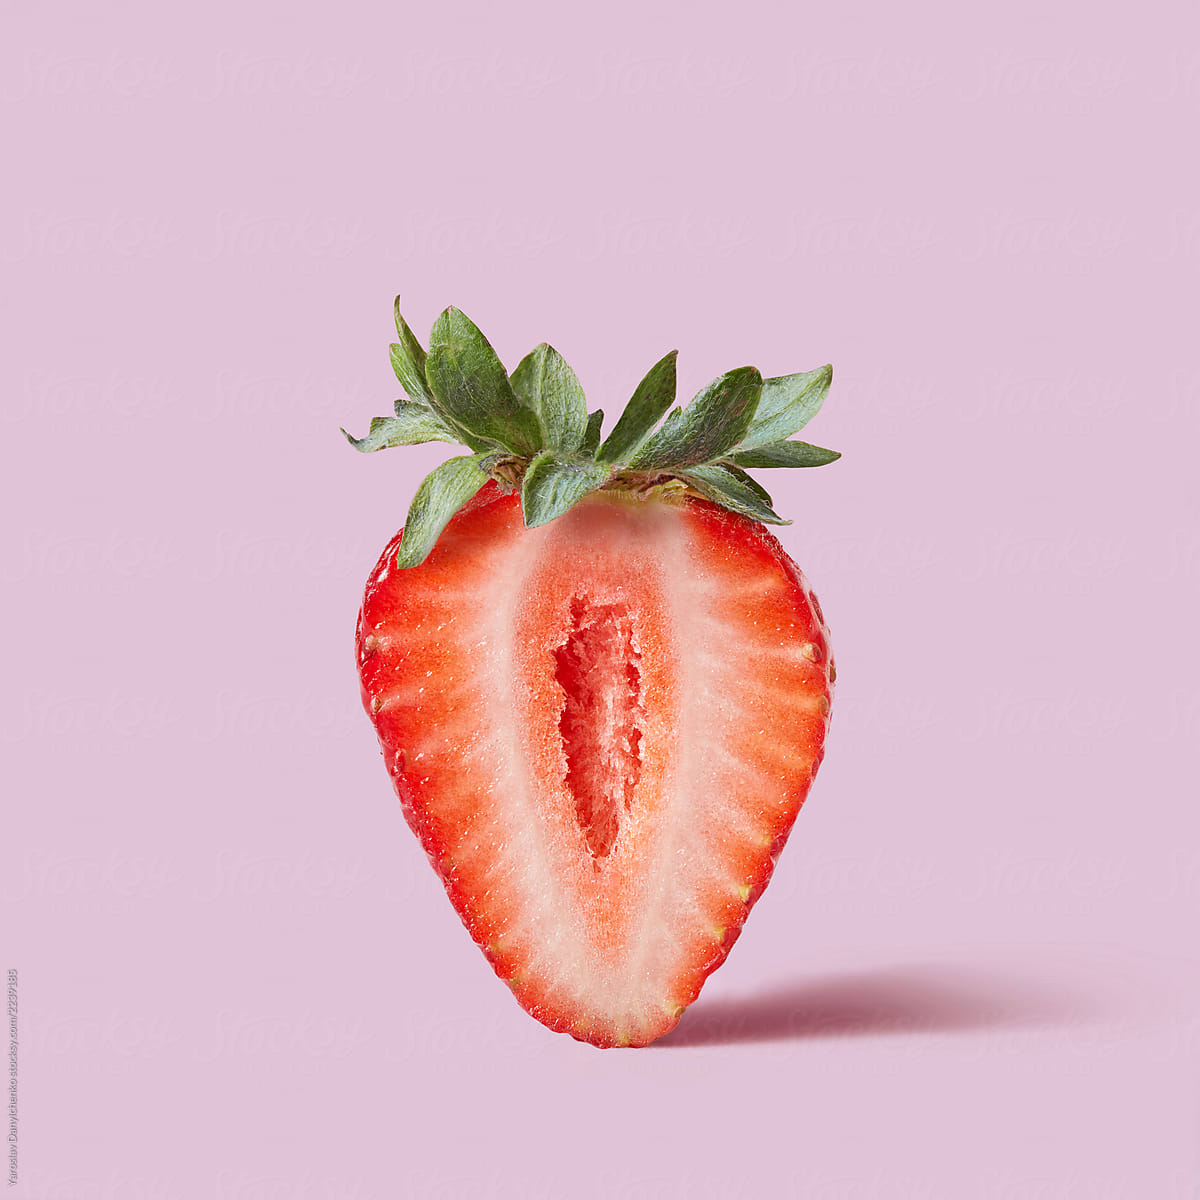 Ripe organic strawberries with green leaves on a pink background